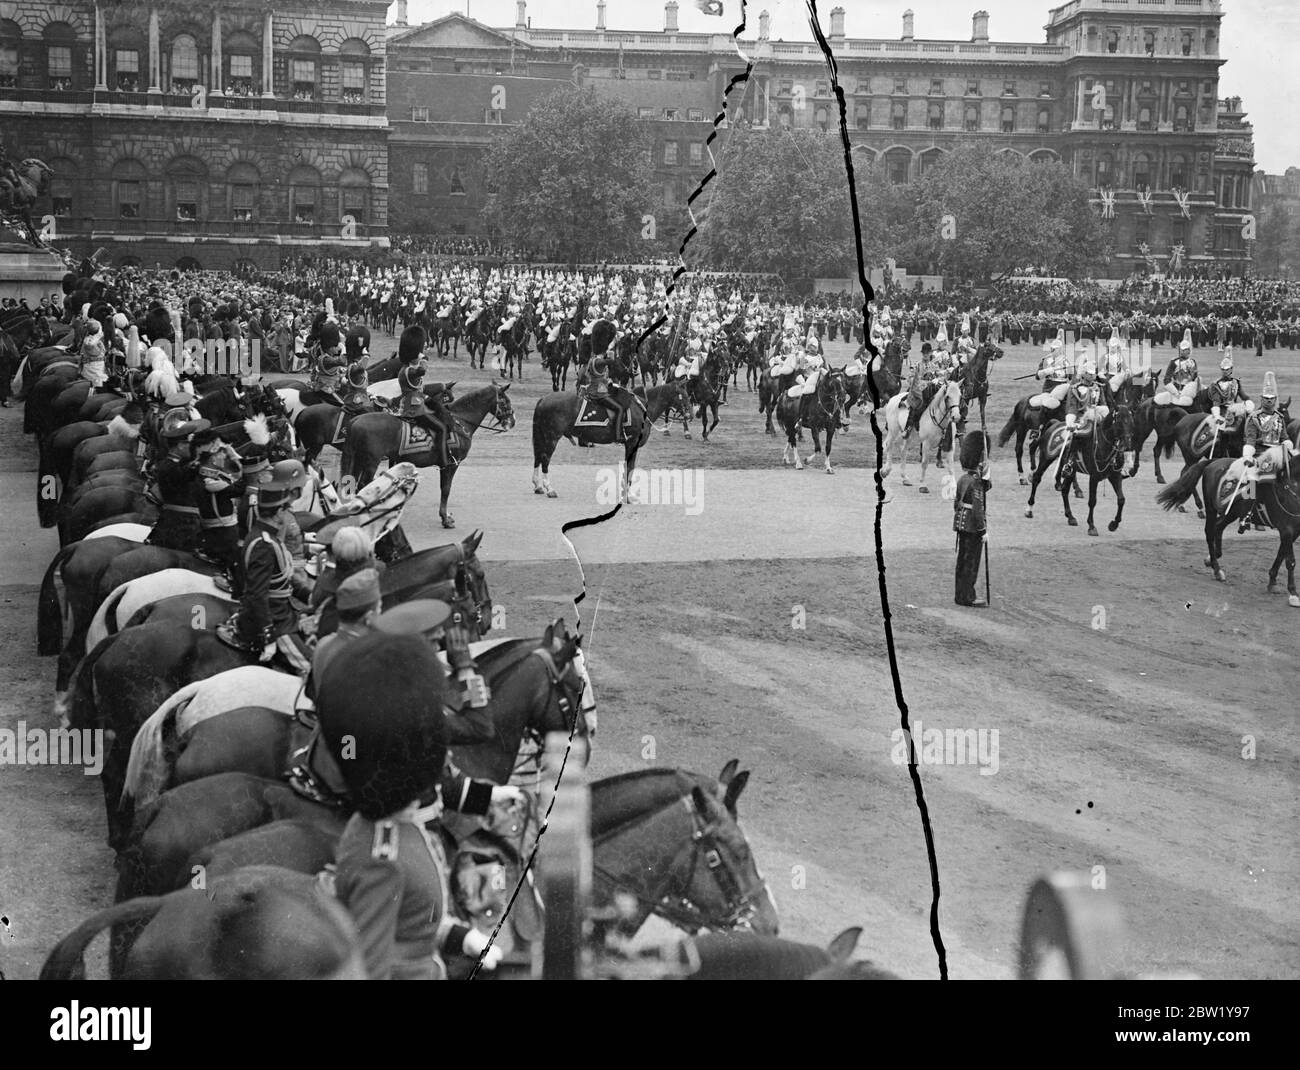 Cavalry in March past at Trooping the Colour. For the first time since his succession the King rode in procession from Buckingham Palace to attend the ceremony of Trooping the Colour on the Horse Guards Parade. The King was accompanied by the Duke of Gloucester and Kent and Prince Arthur of Connaught. The Queen and other members of the Royal Family watched the ceremony. The colour of the first Battalion Coldstream Guards was trooped. Photo shows: cavalry marching past the King. 9 June 1937 Stock Photo